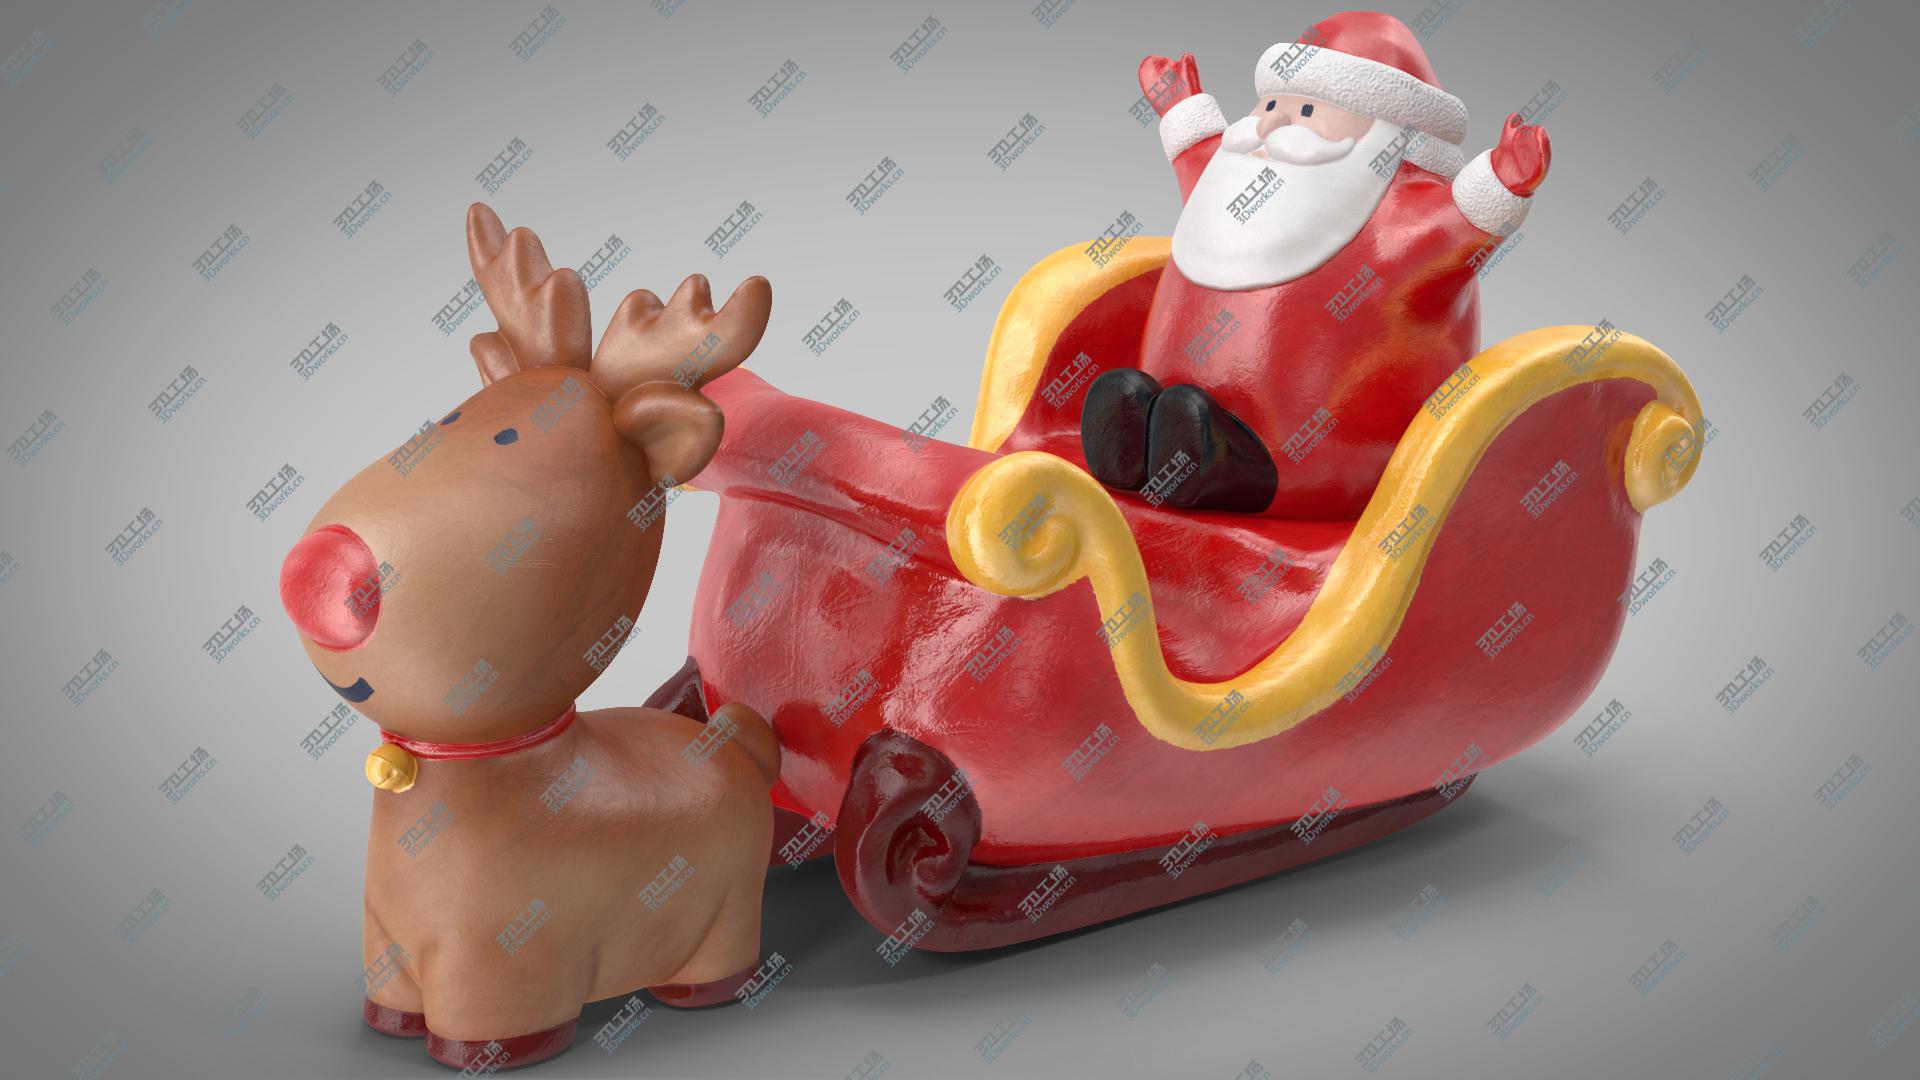 images/goods_img/202105071/Santa Claus with Sleigh Decorative Figurine 2 3D model/3.jpg